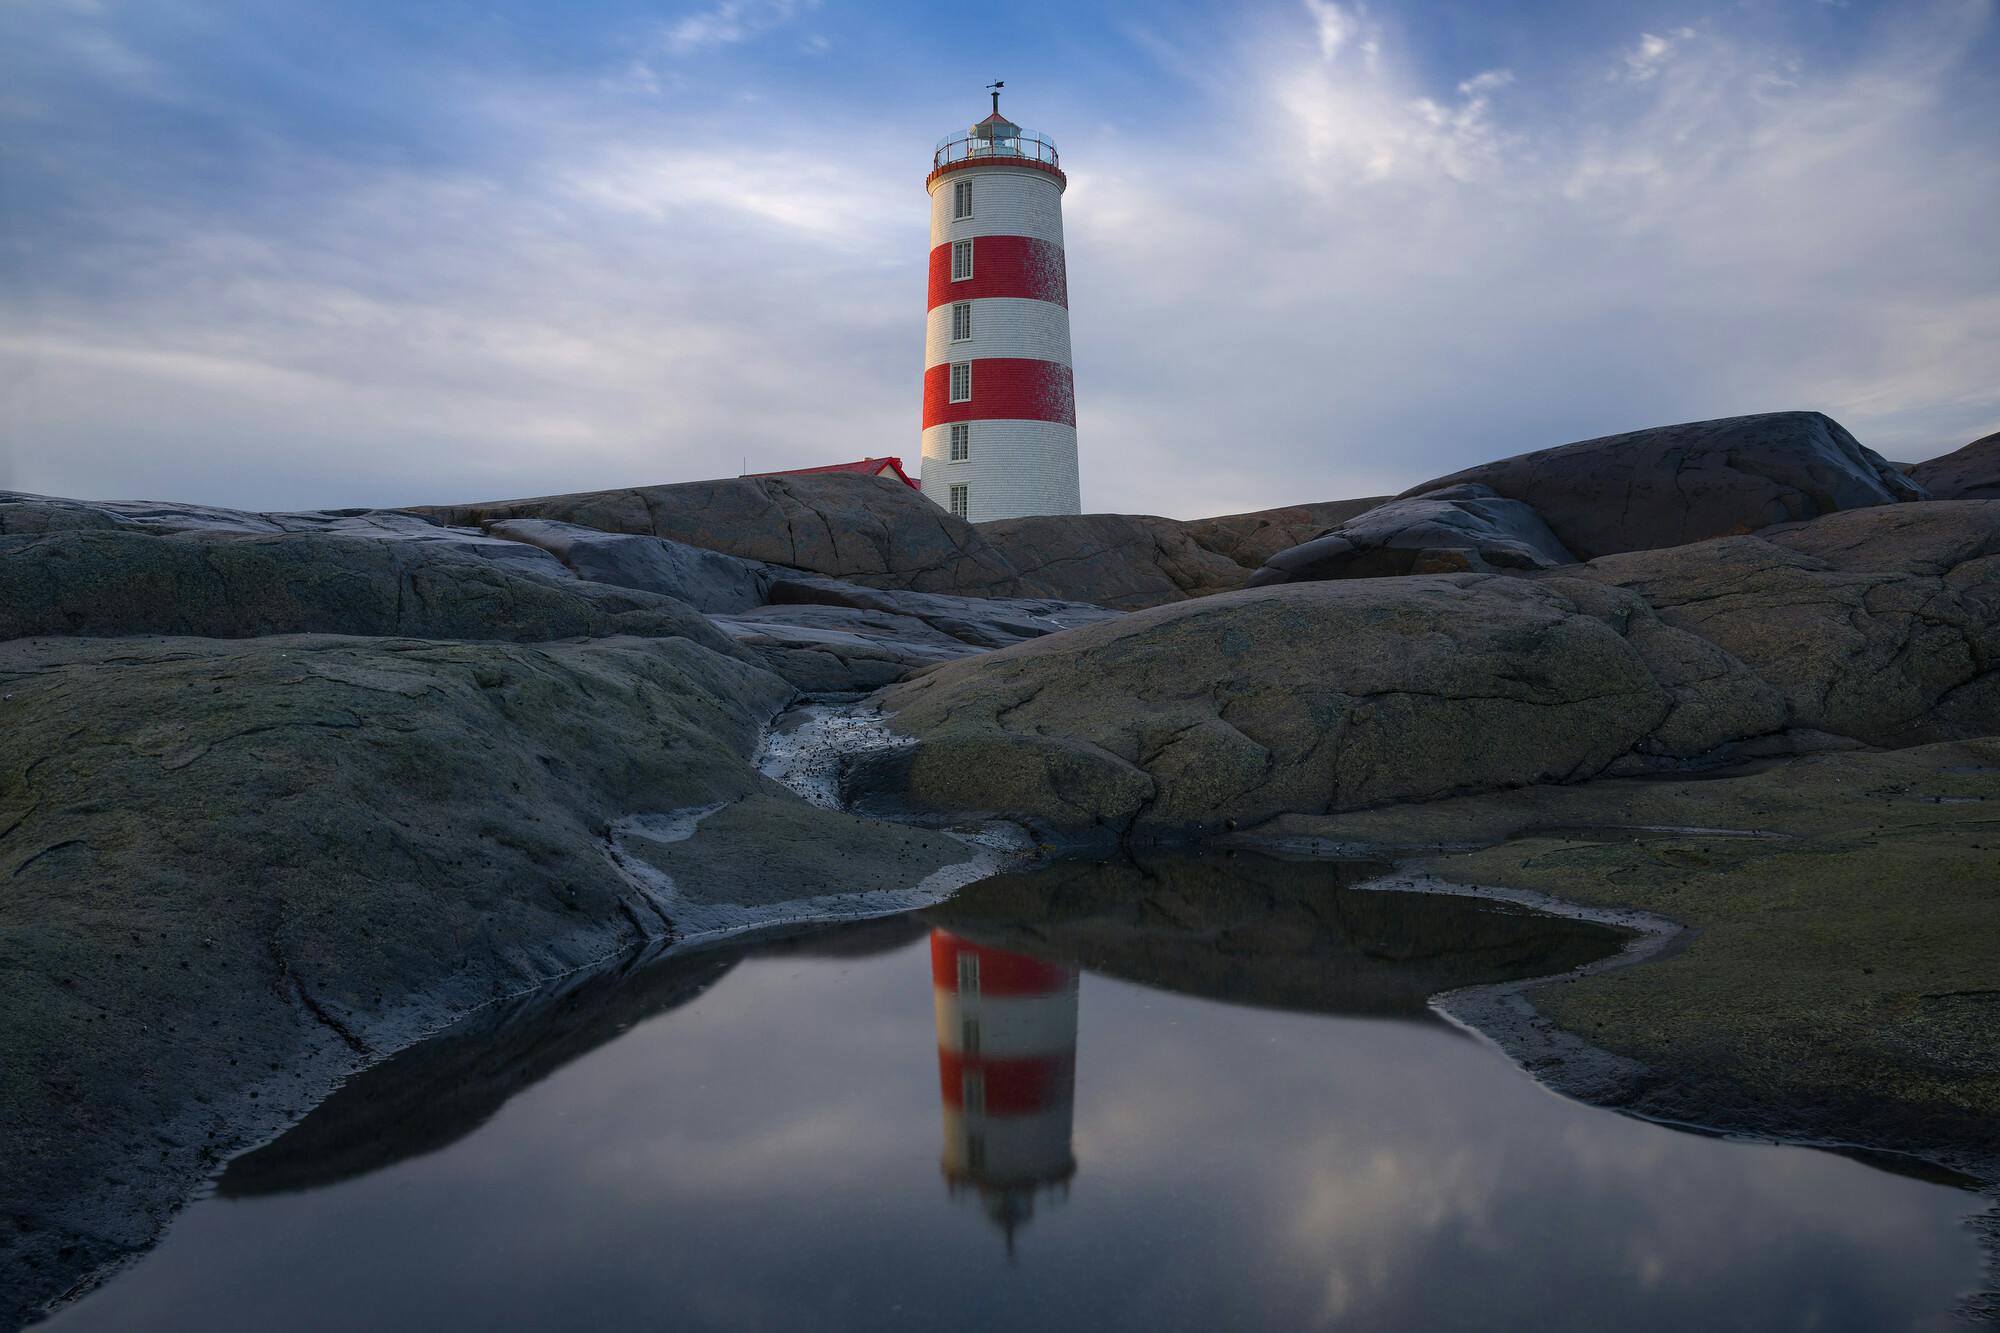 Pointe-des-Monts Lighthouse Reflection